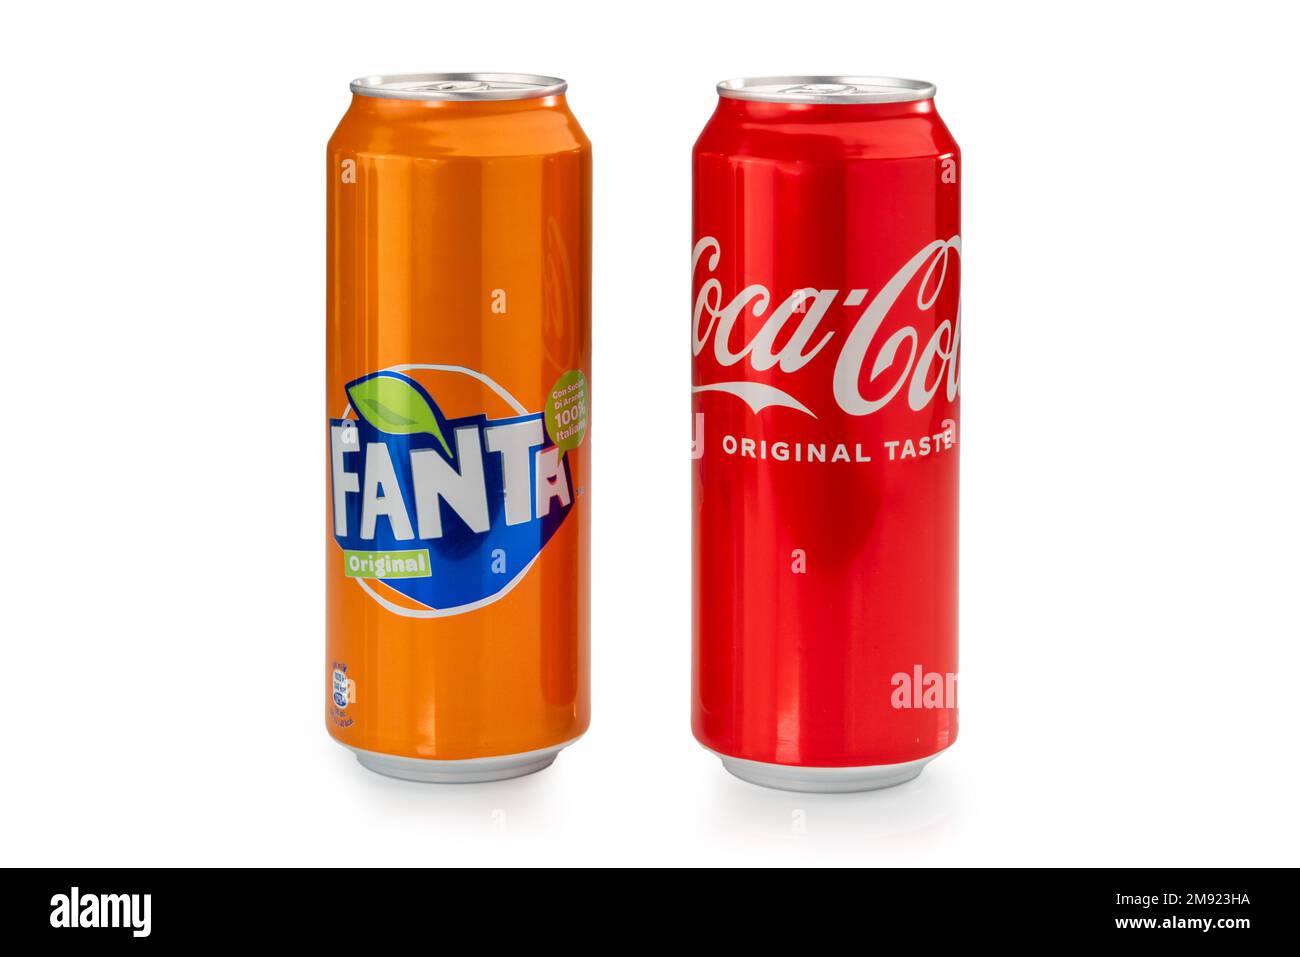 italy - january 14, 2023: Can of Coca Cola original taste with can of Fanta Original soft drink with orange juice isolated on white with clipping path Stock Photo